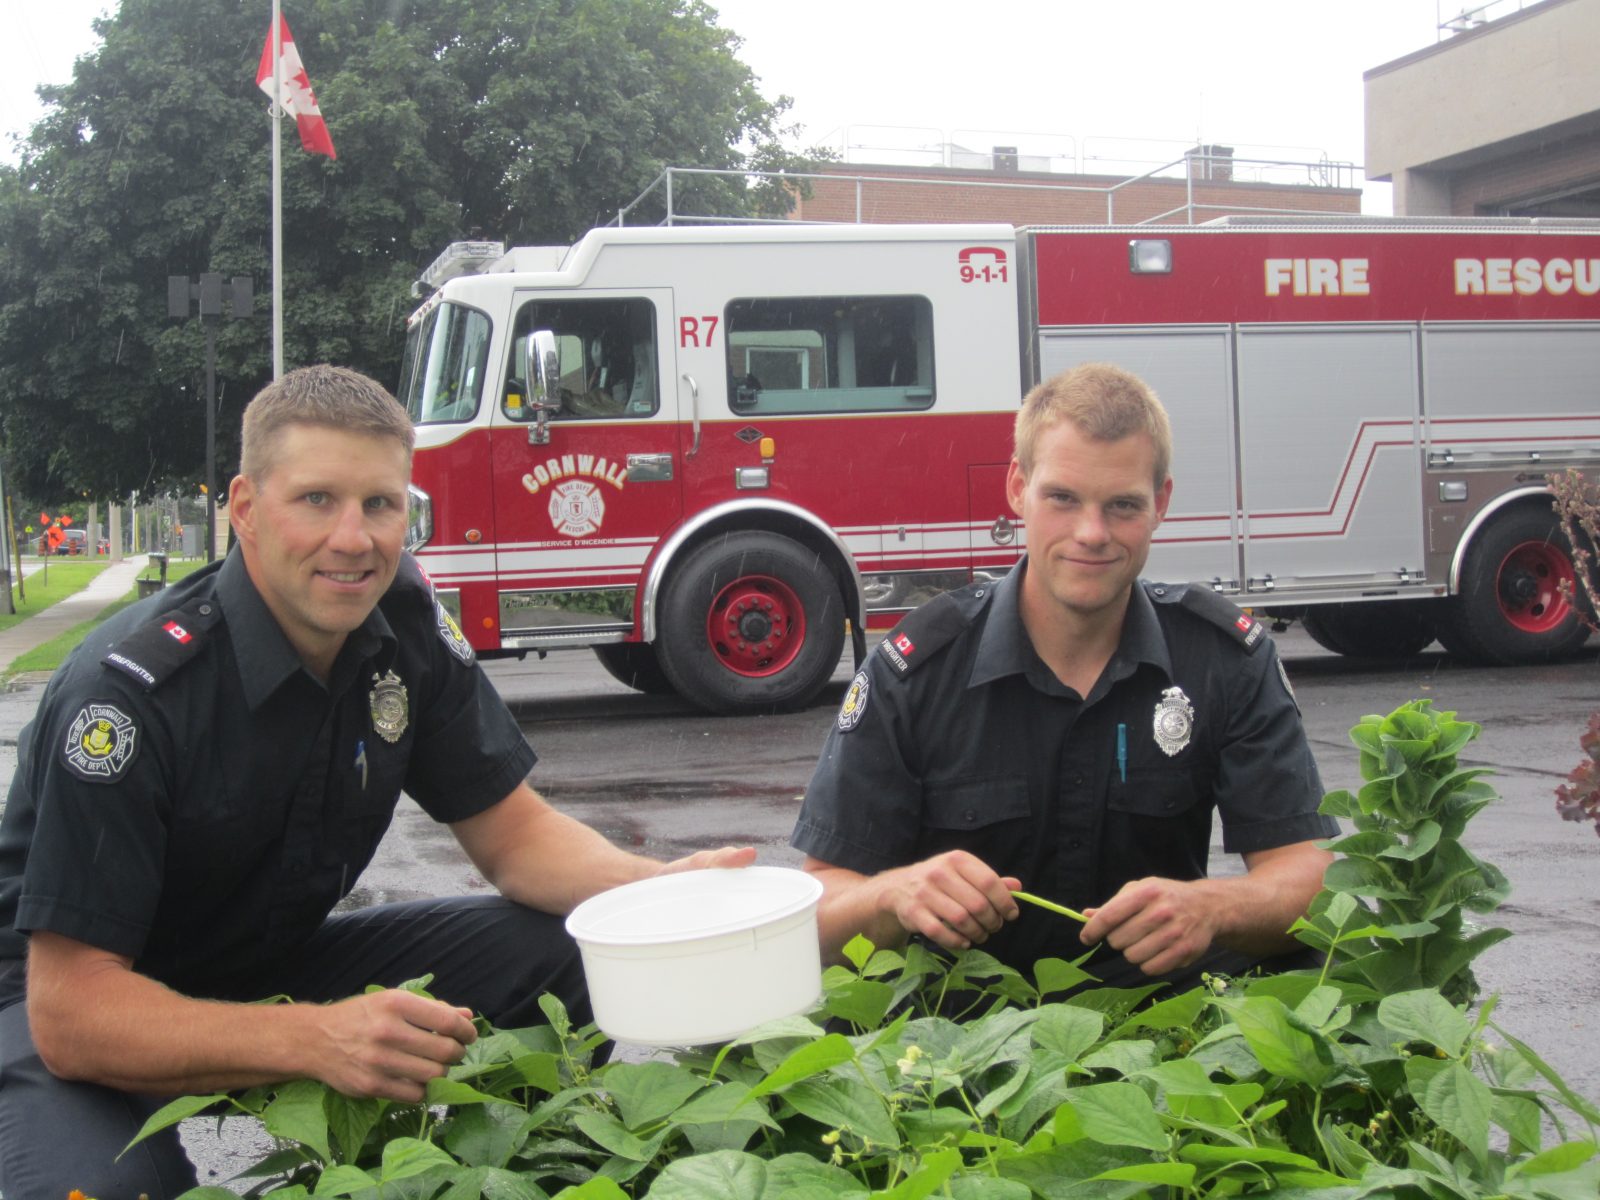 Something new sprouting at fire station